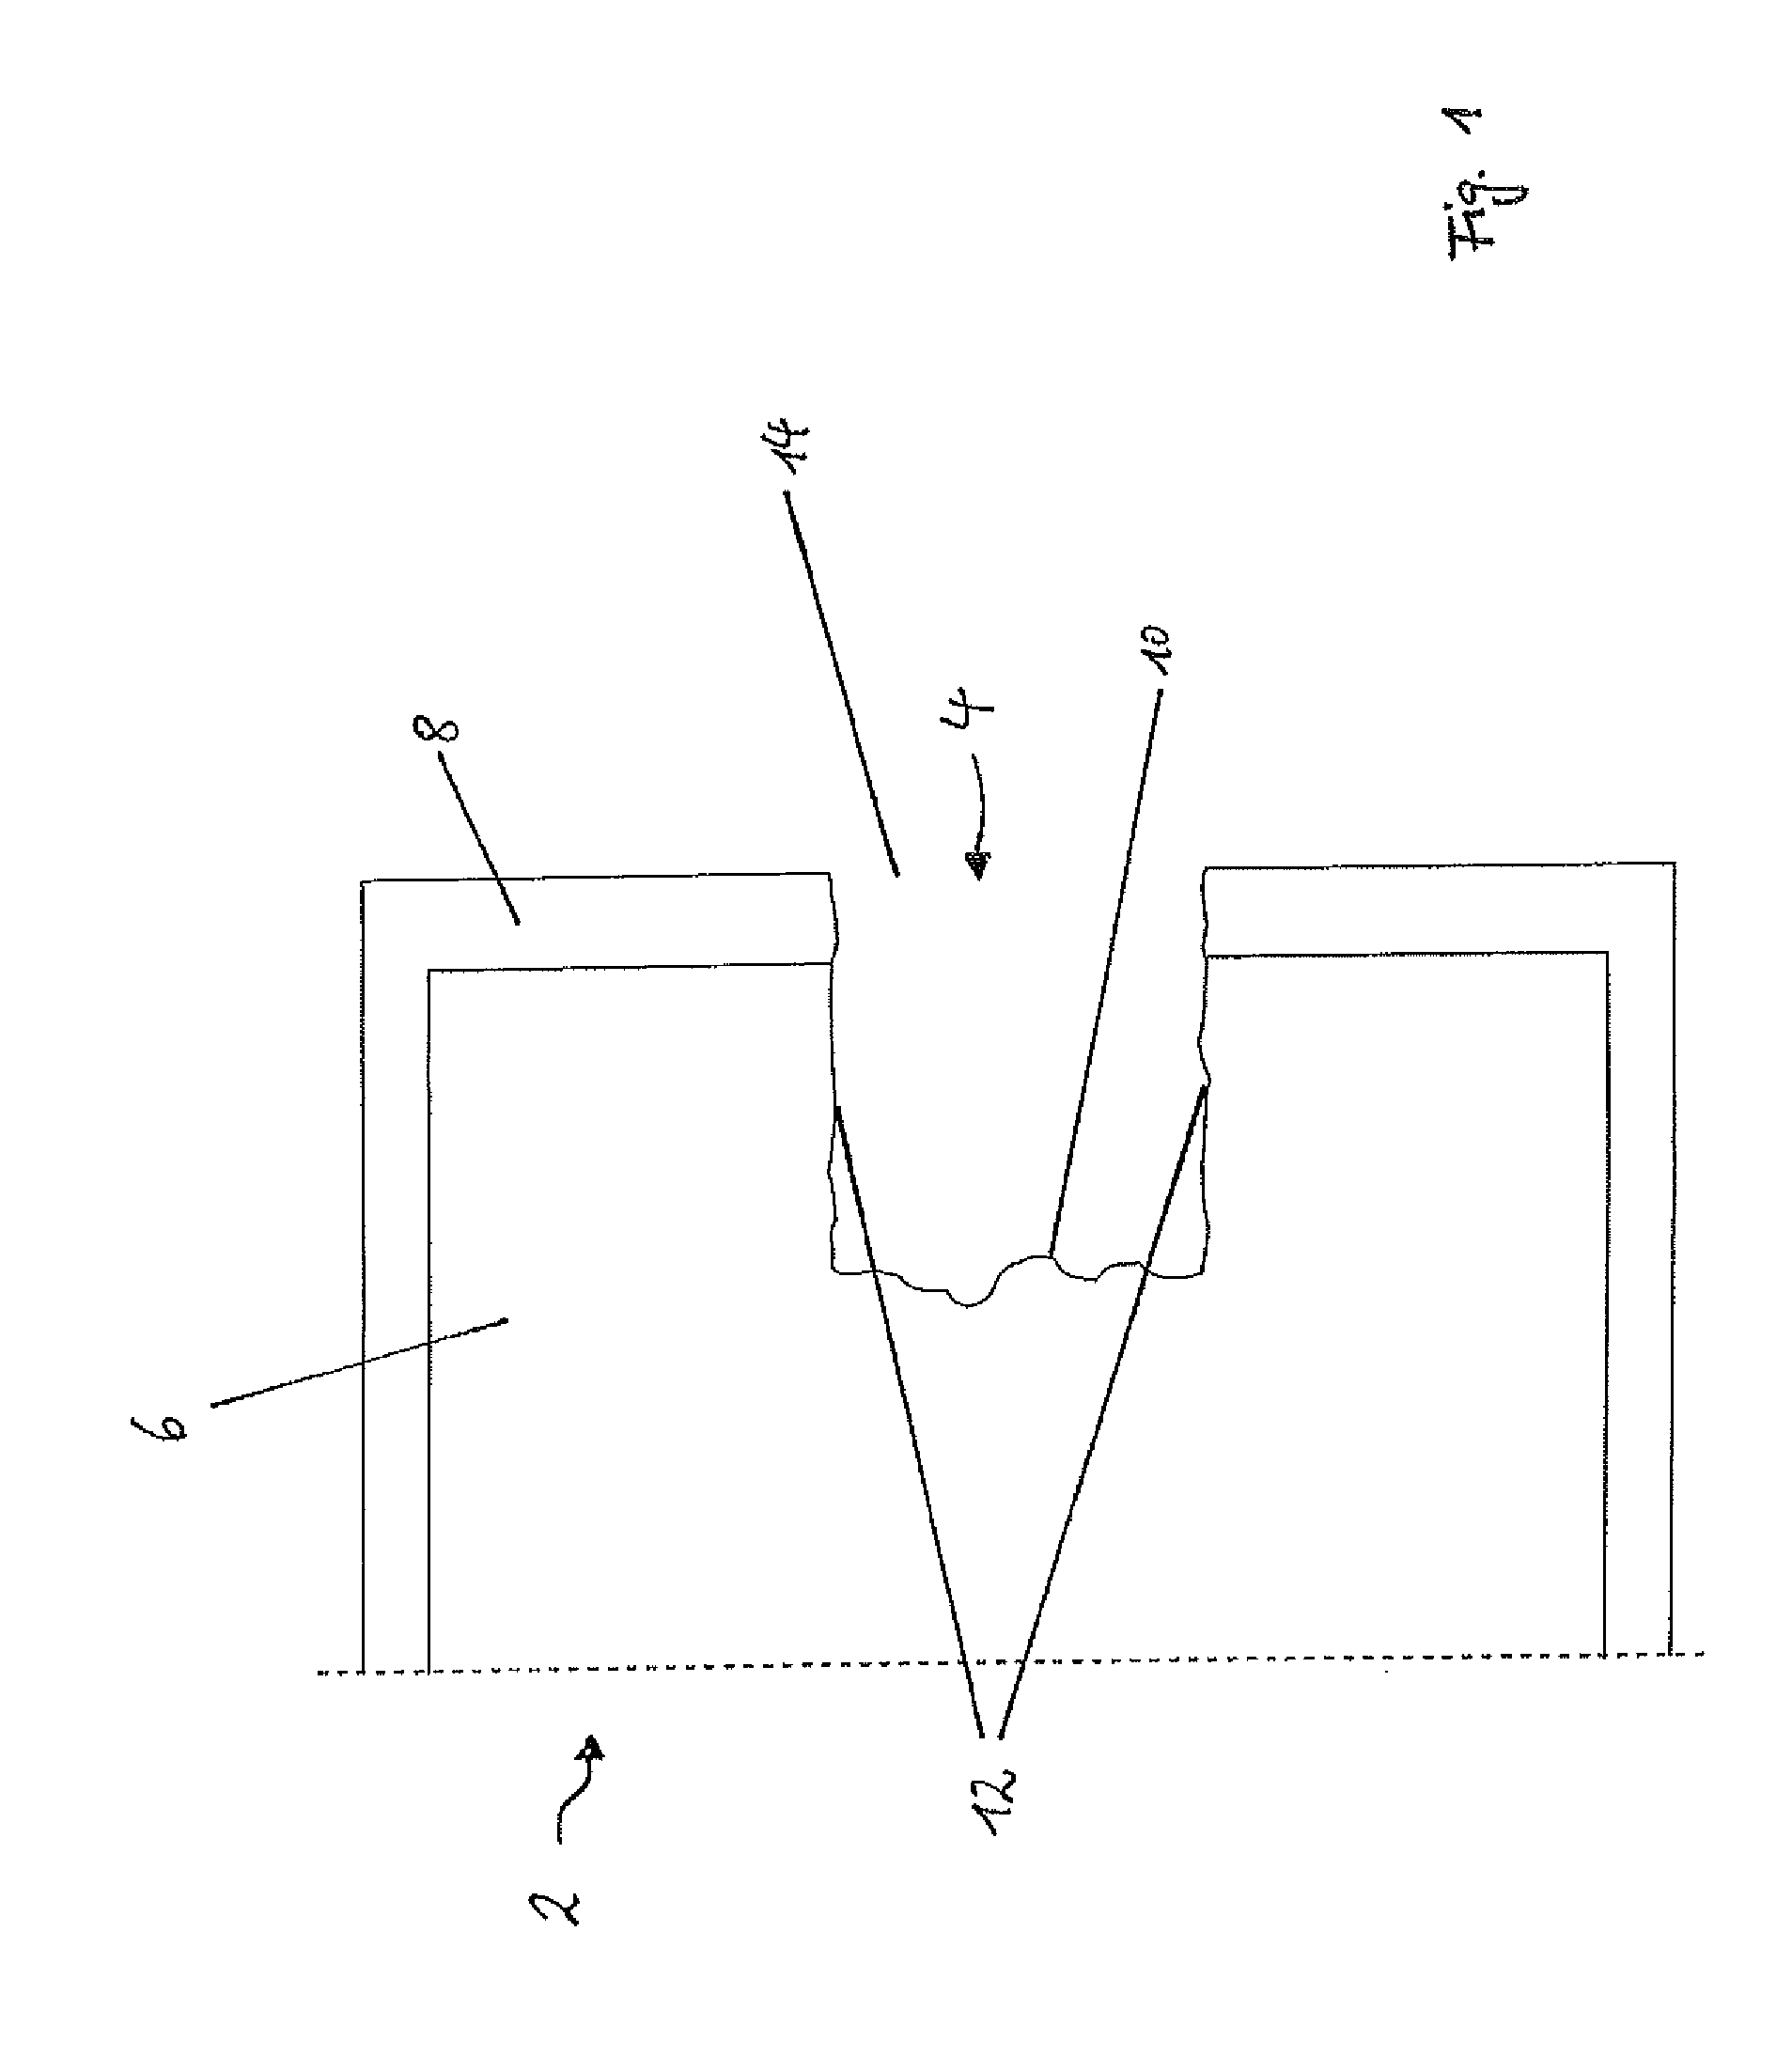 Method for sealing of replacement windows